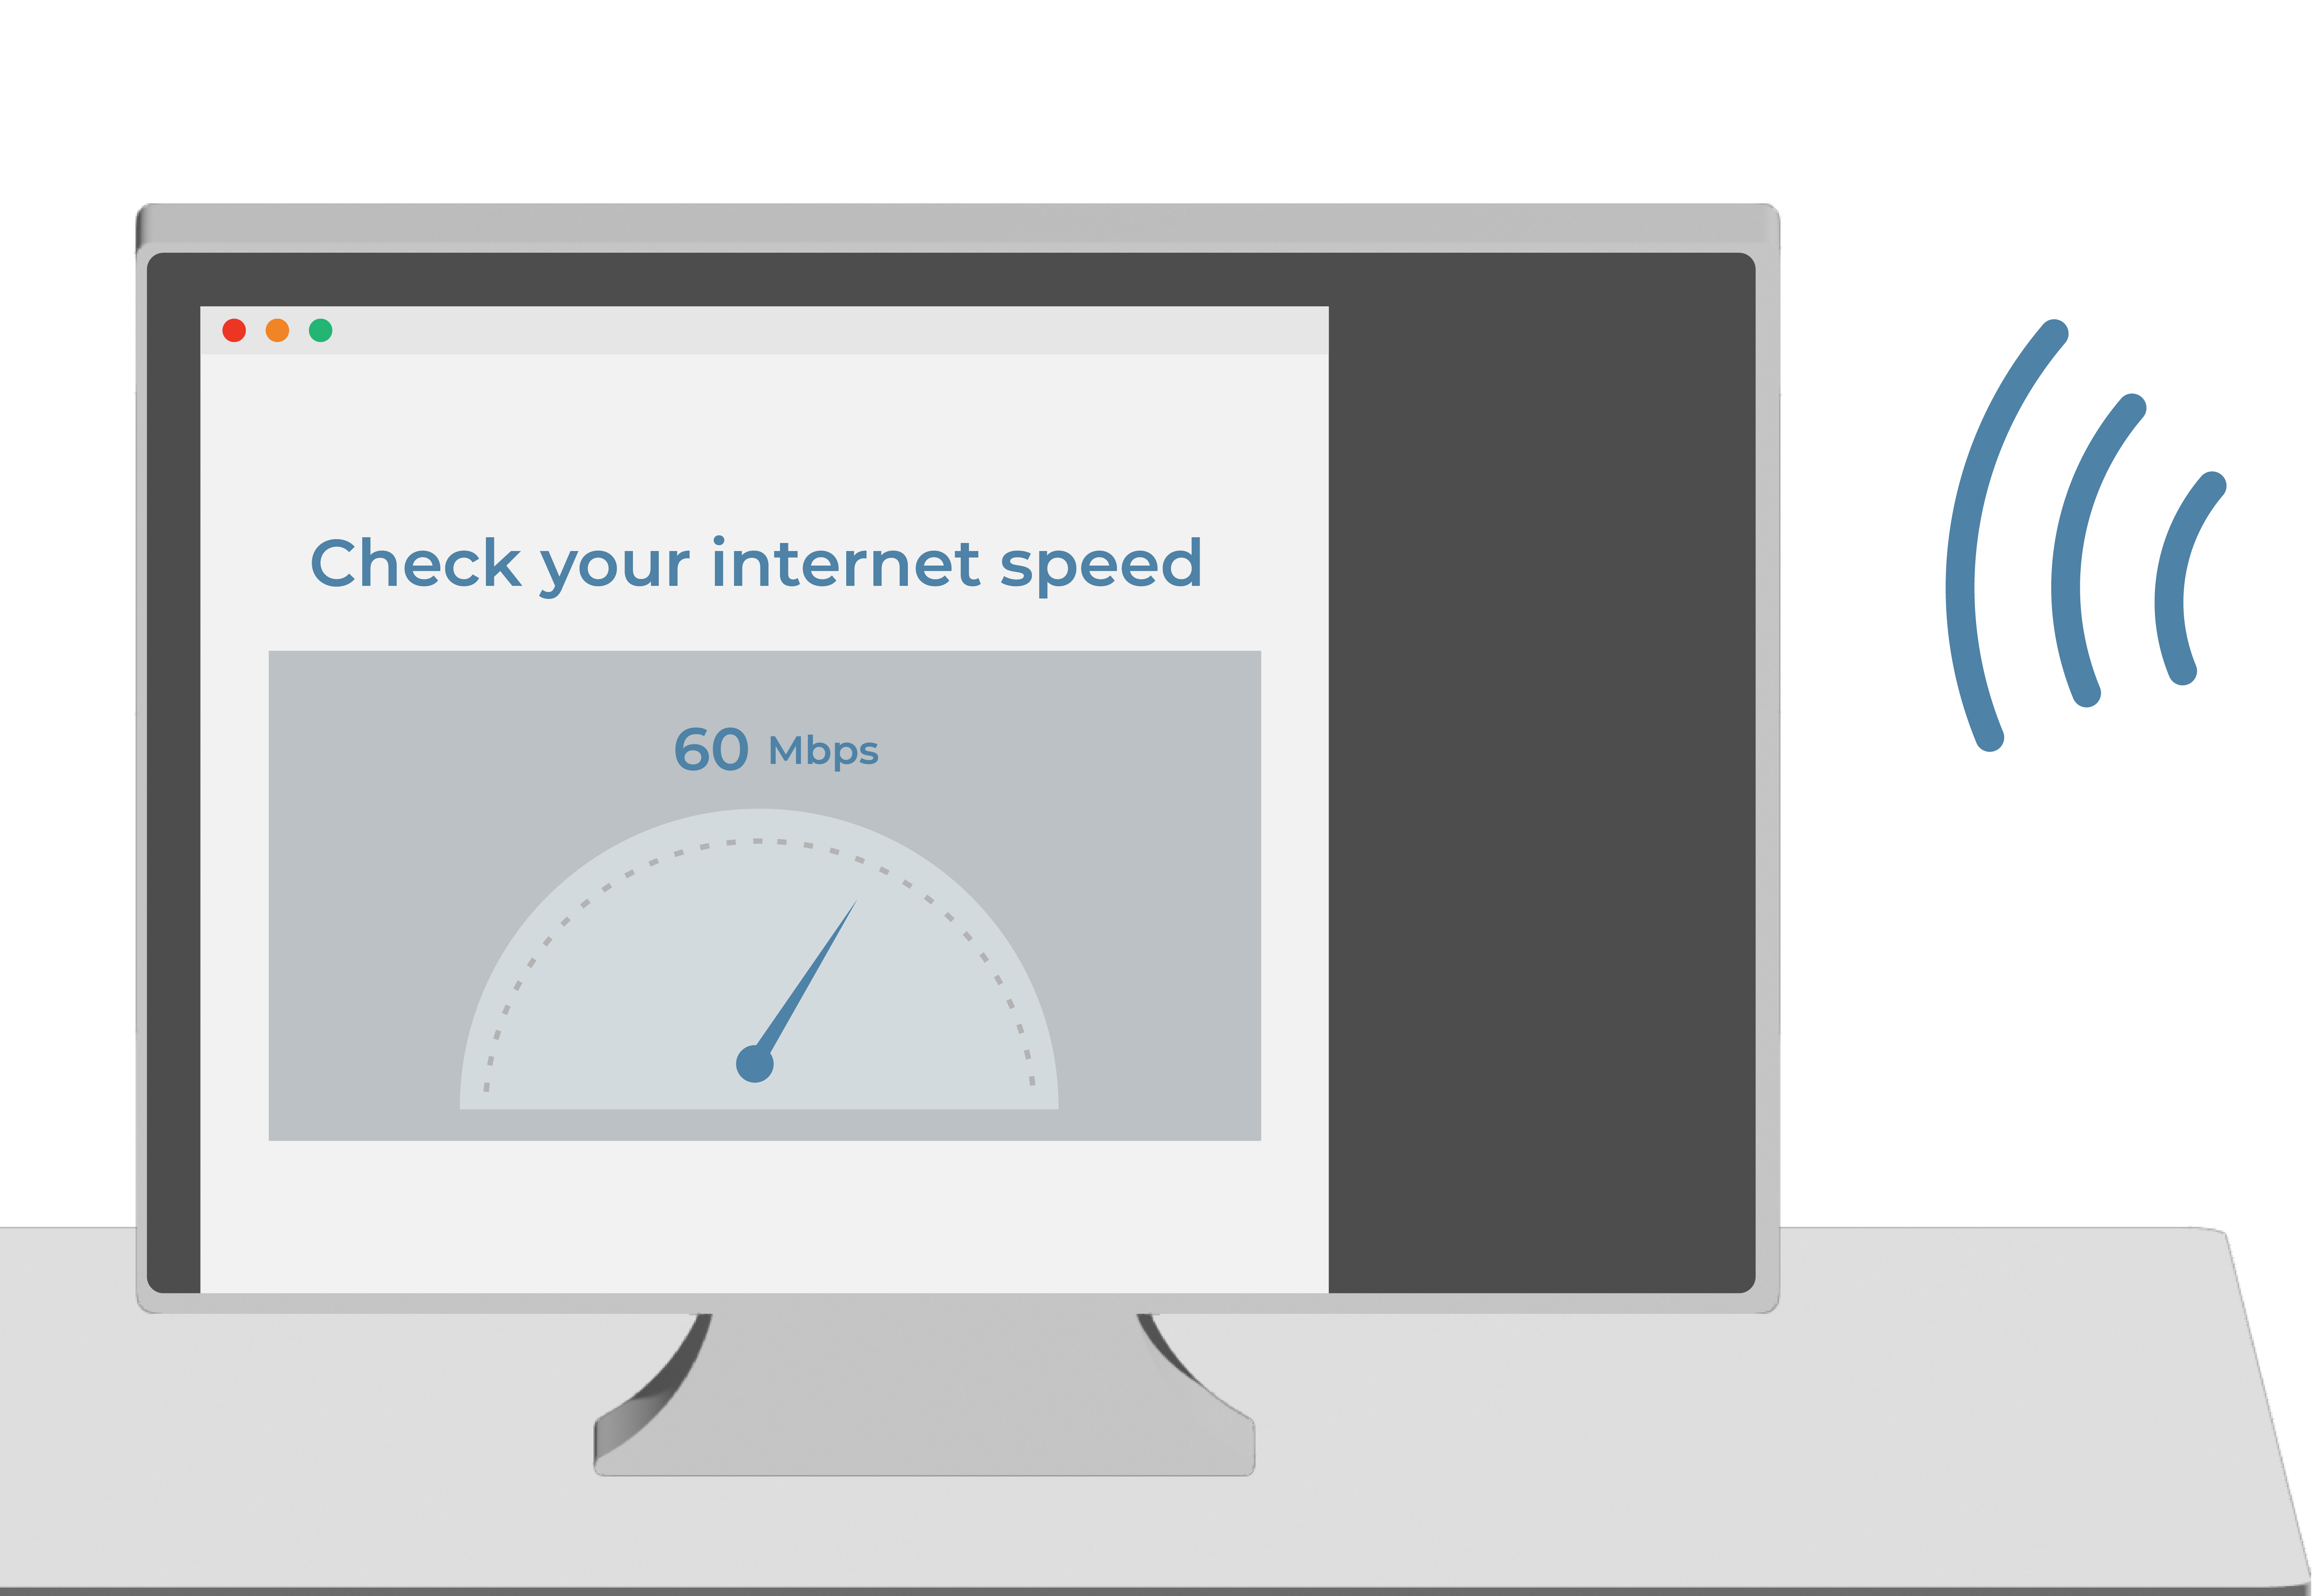 Tutorial illustration of how to check your broadband internet speed